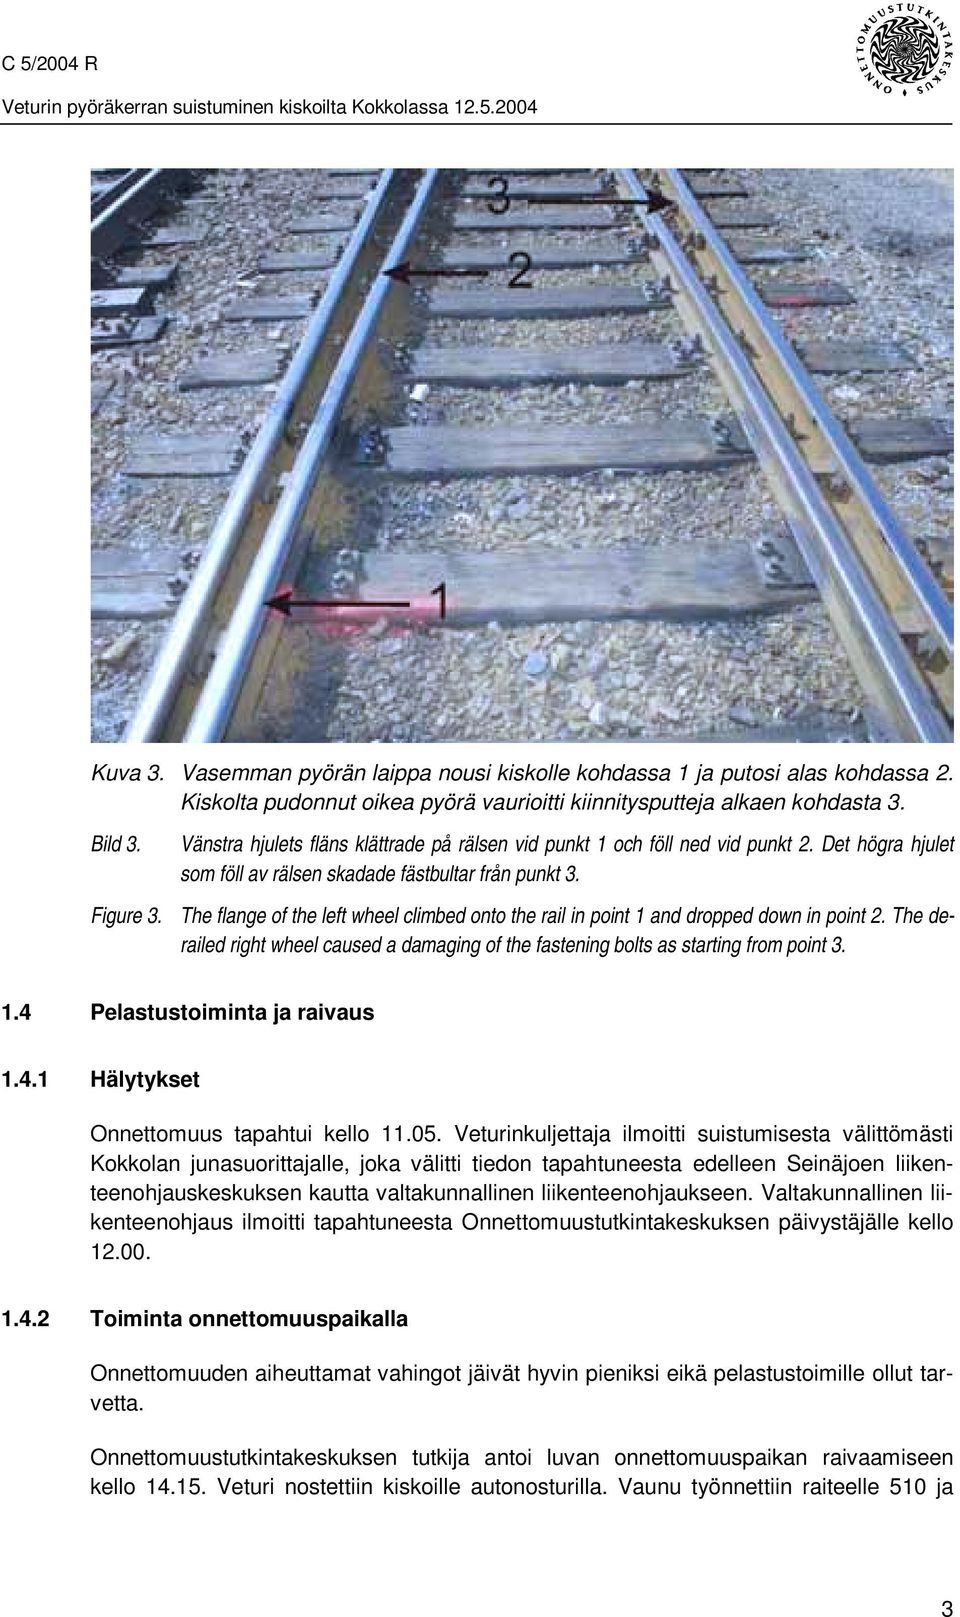 The flange of the left wheel climbed onto the rail in point 1 and dropped down in point 2. The derailed right wheel caused a damaging of the fastening bolts as starting from point 3. 1.4 Pelastustoiminta ja raivaus 1.